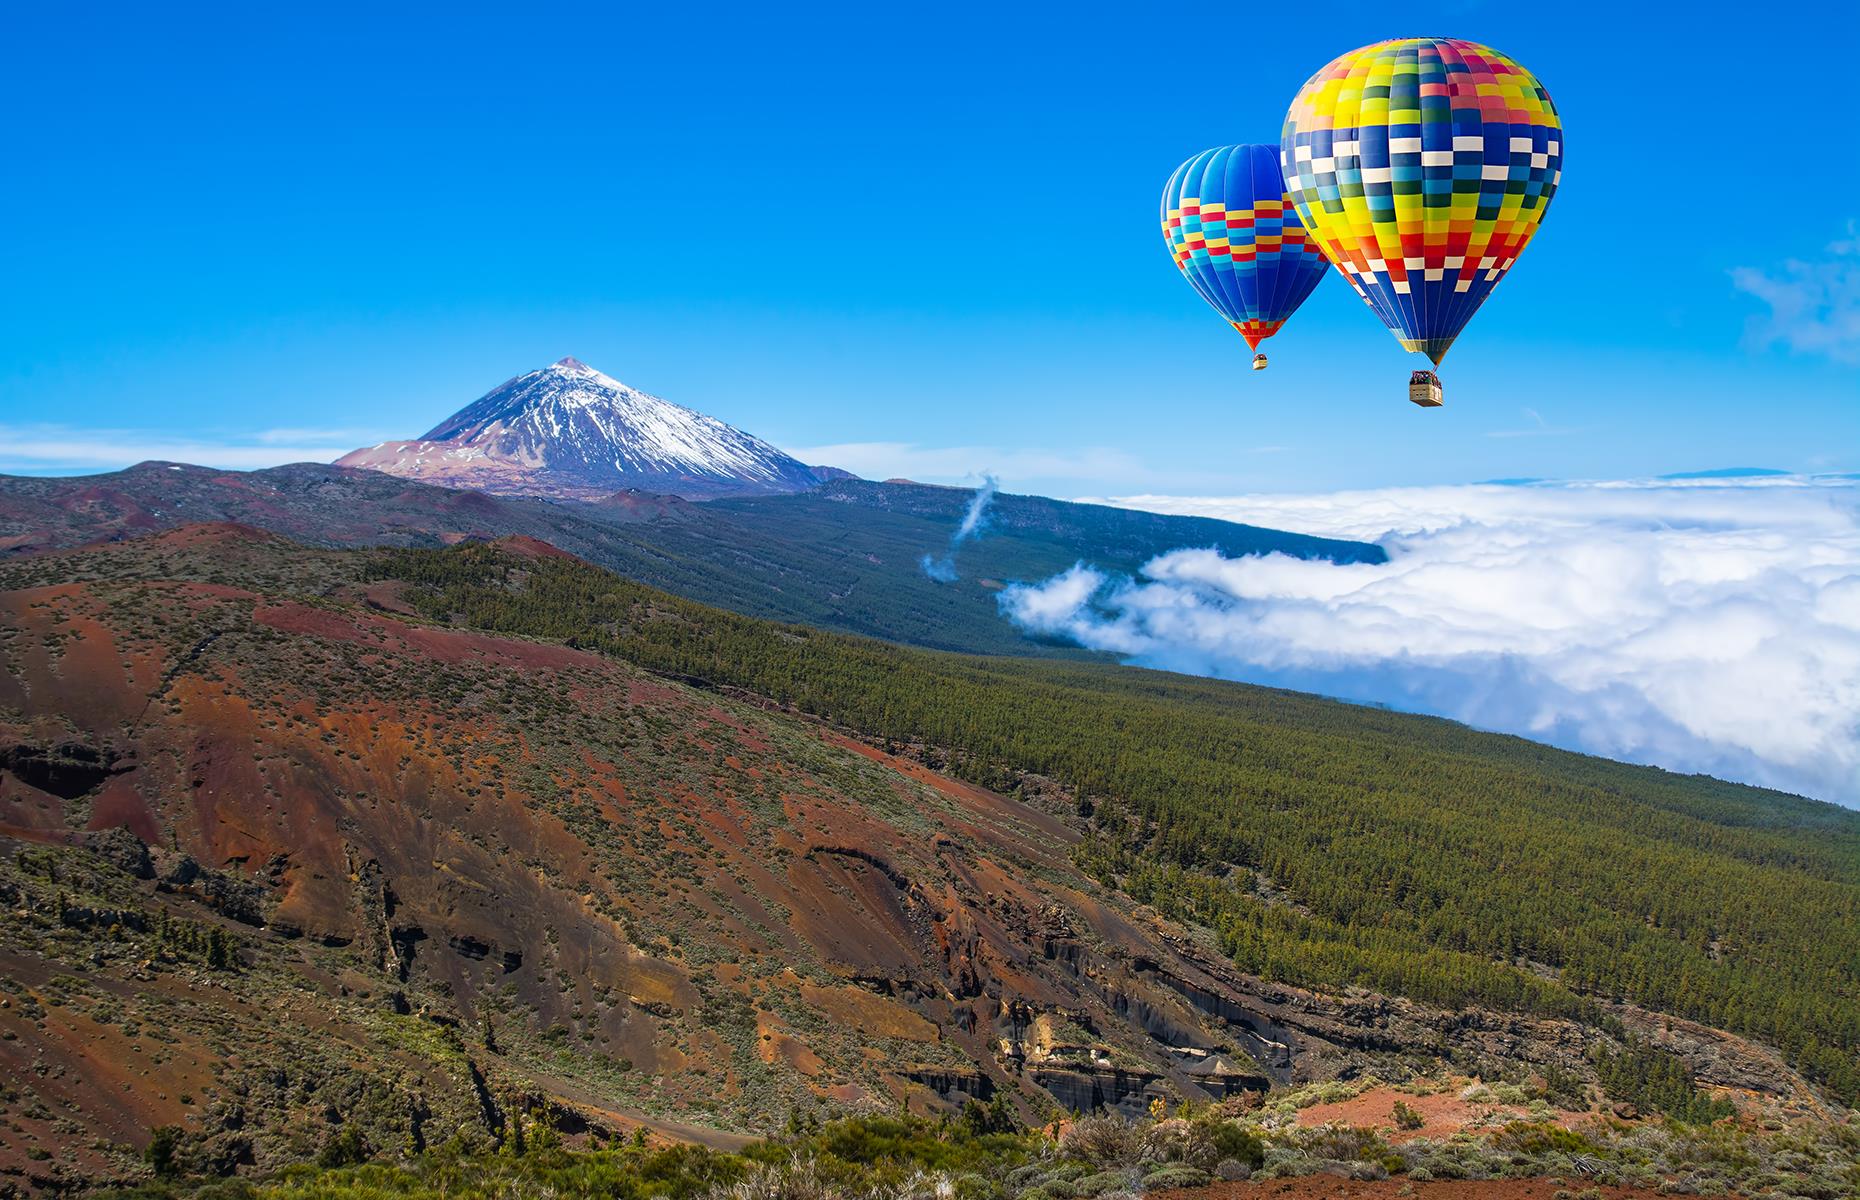 Tenerife is best known for its beautiful beaches and bustling resorts, but the island's interior has a striking landscape ripe for exploration. The main draw is Mount Teide, a large volcano right in the island's center, which has spectacular views out to the ocean. But if you don't fancy climbing Teide, take a balloon flight instead for equally breathtaking views without the physical exertion.